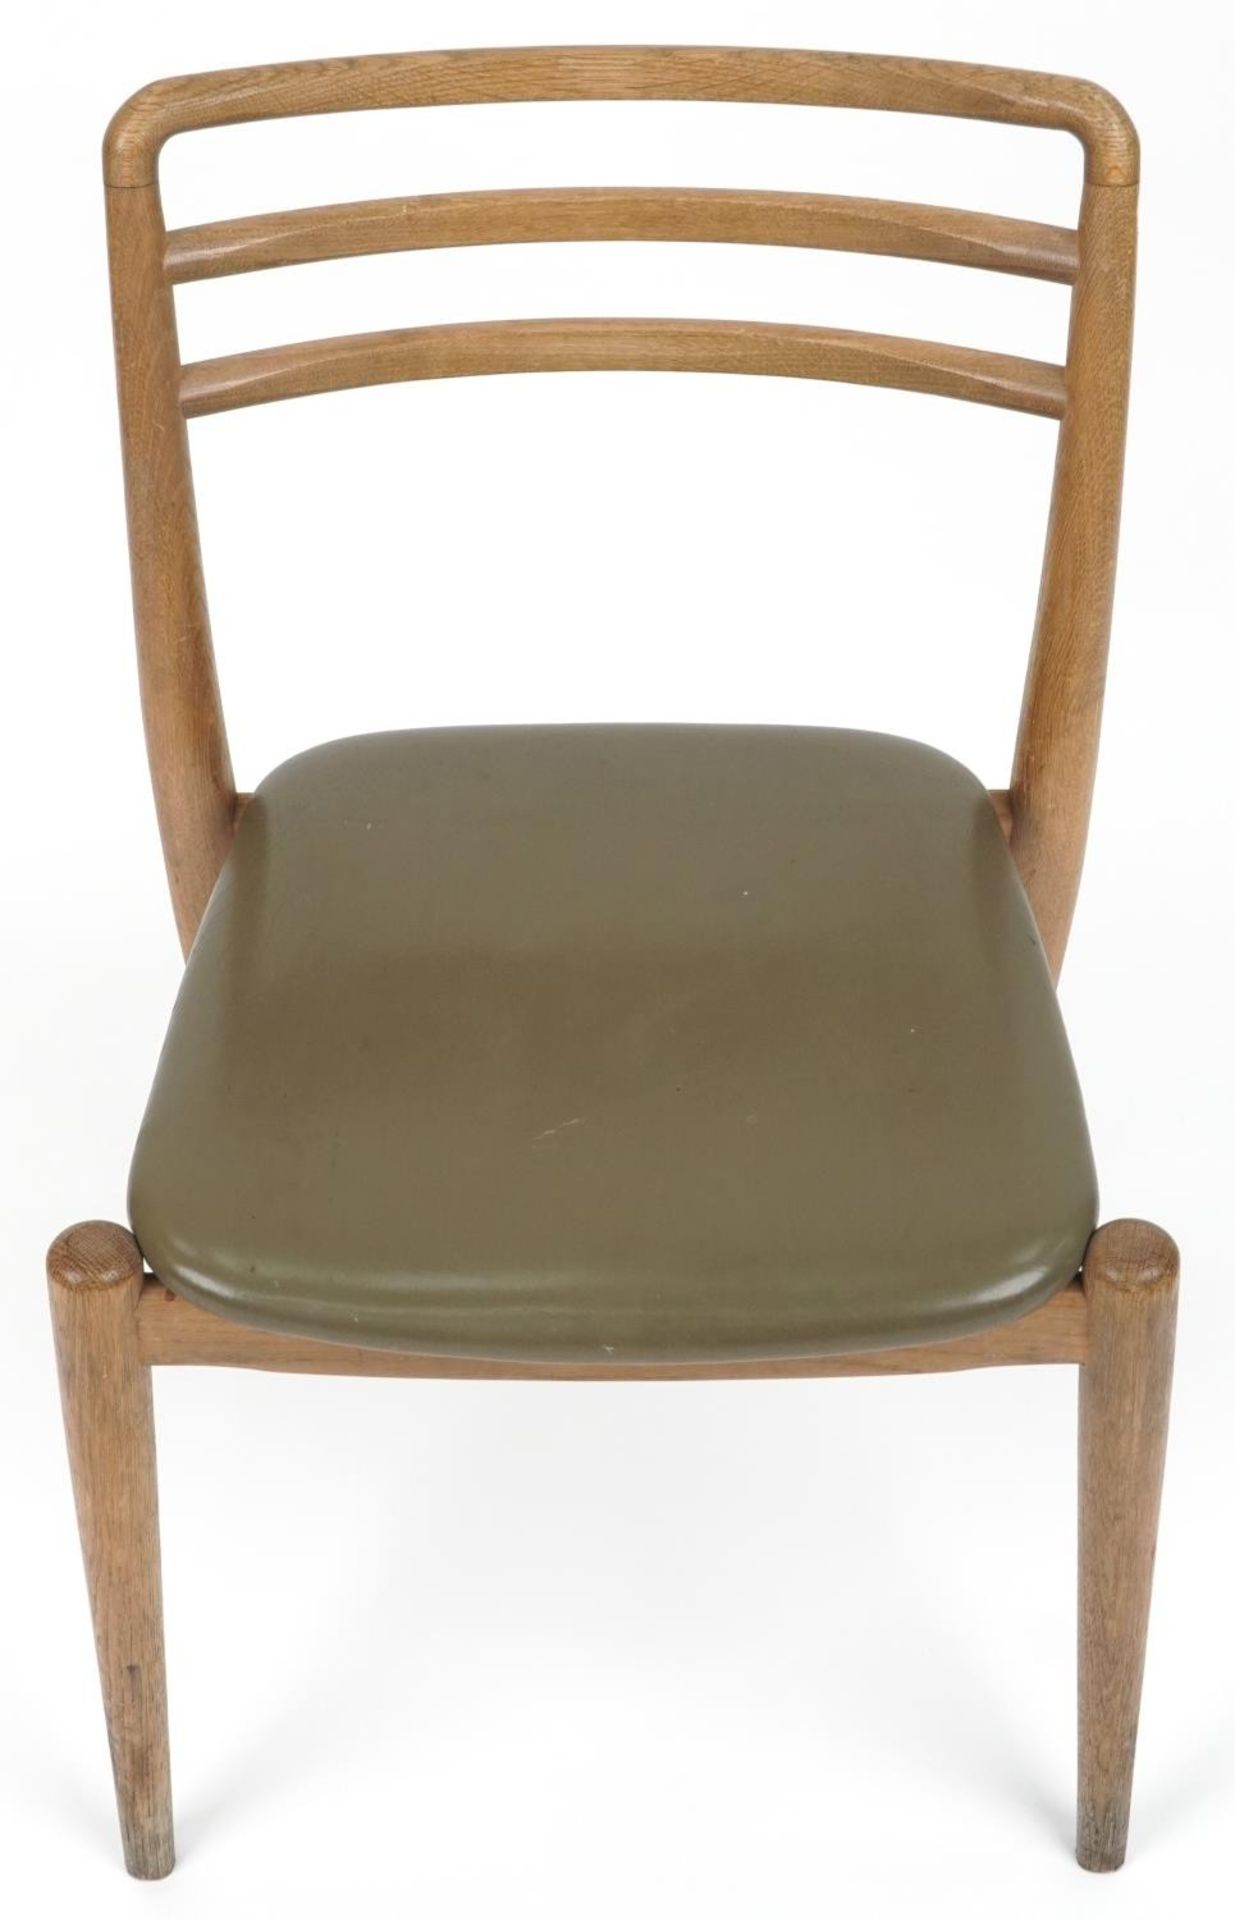 Scandinavian design teak chair with leather upholstered seat, 75cm high - Image 3 of 4